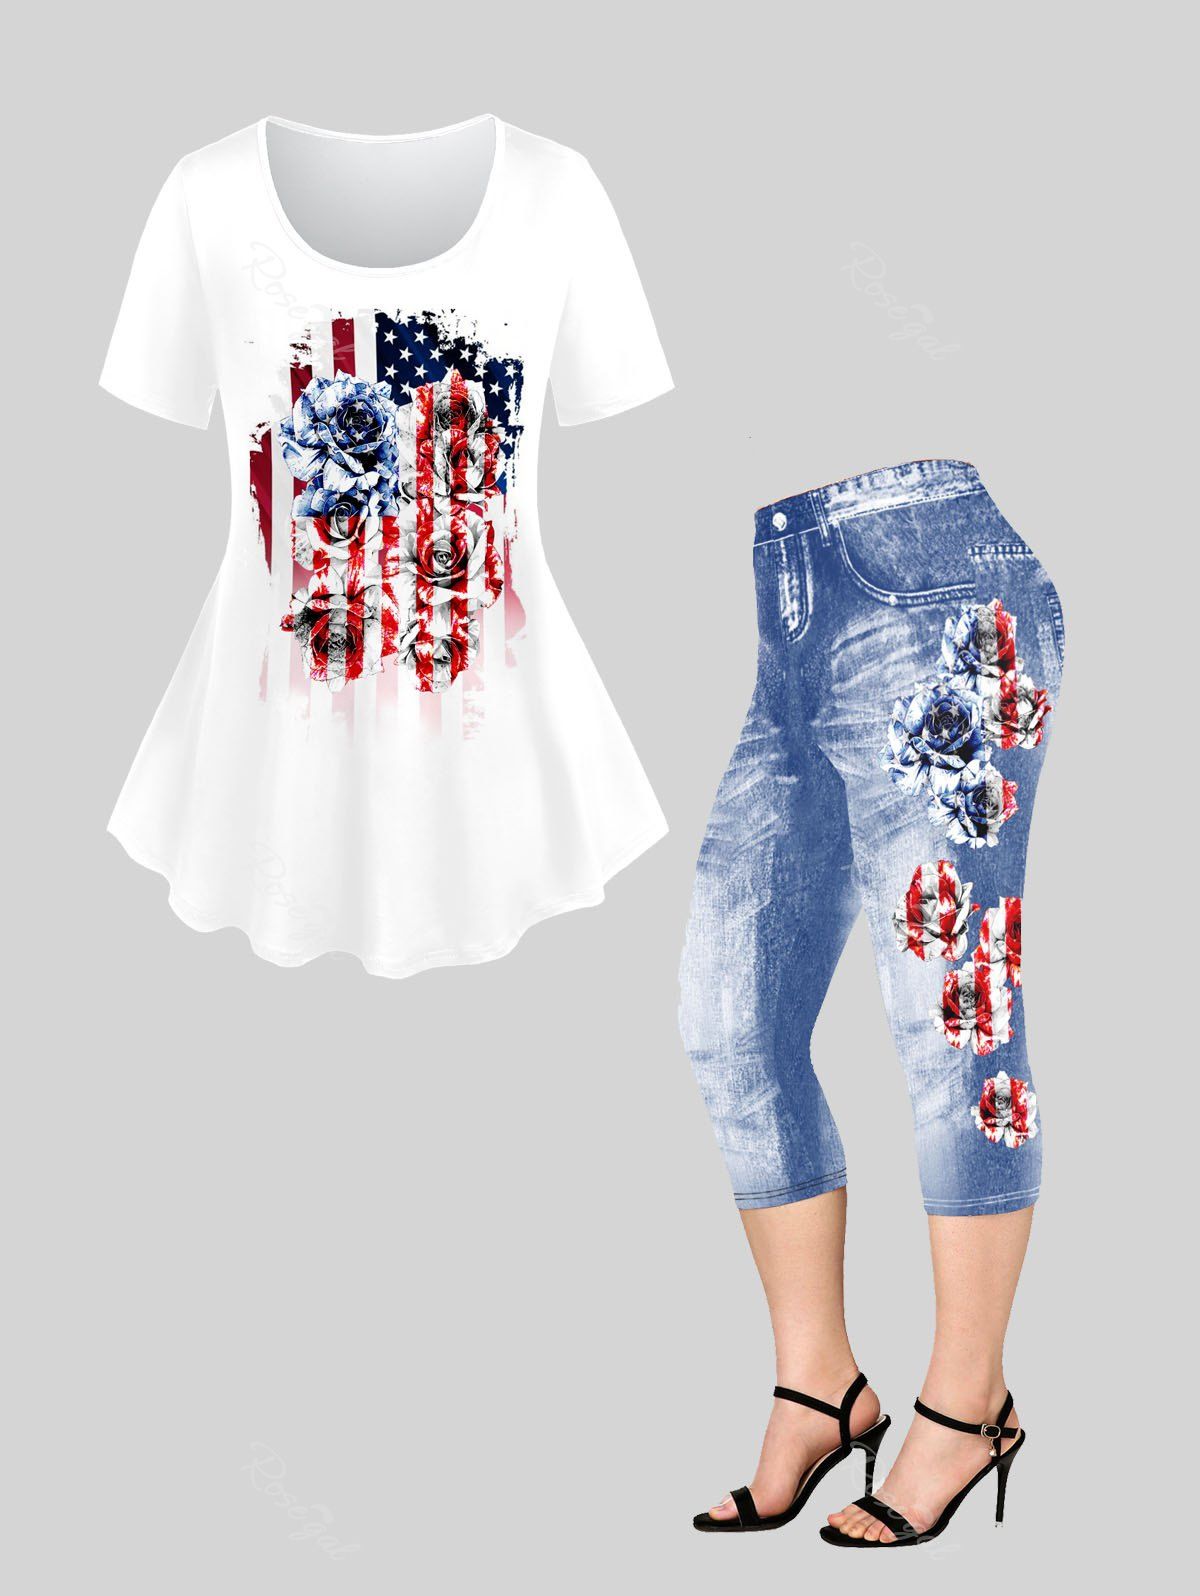 Shop Rose American Flag Printed Patriotic Tee and 3D Jeans Print Capri Jeggings Plus Size Outfits  